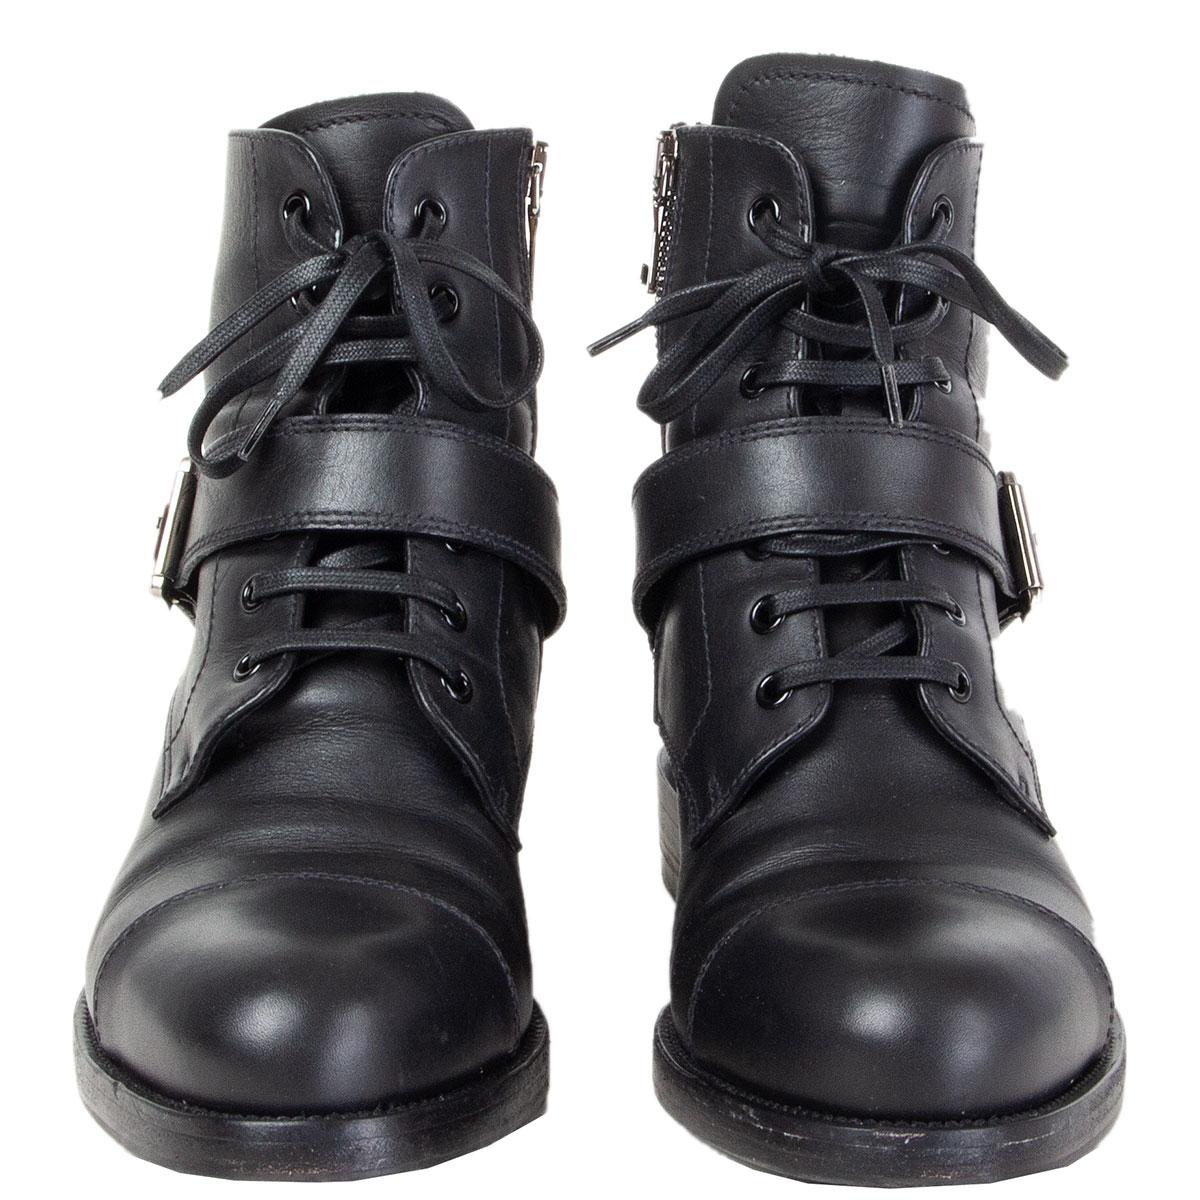 100% authentic Prada lace-up ankle-boots with buckle detail on the side in black leather. Open with a zipper on the inside. Have been worn and are in excellent condition. 

Imprinted Size	38.5
Shoe Size	38.5
Inside Sole	25.5cm (9.9in)
Width	7.5cm